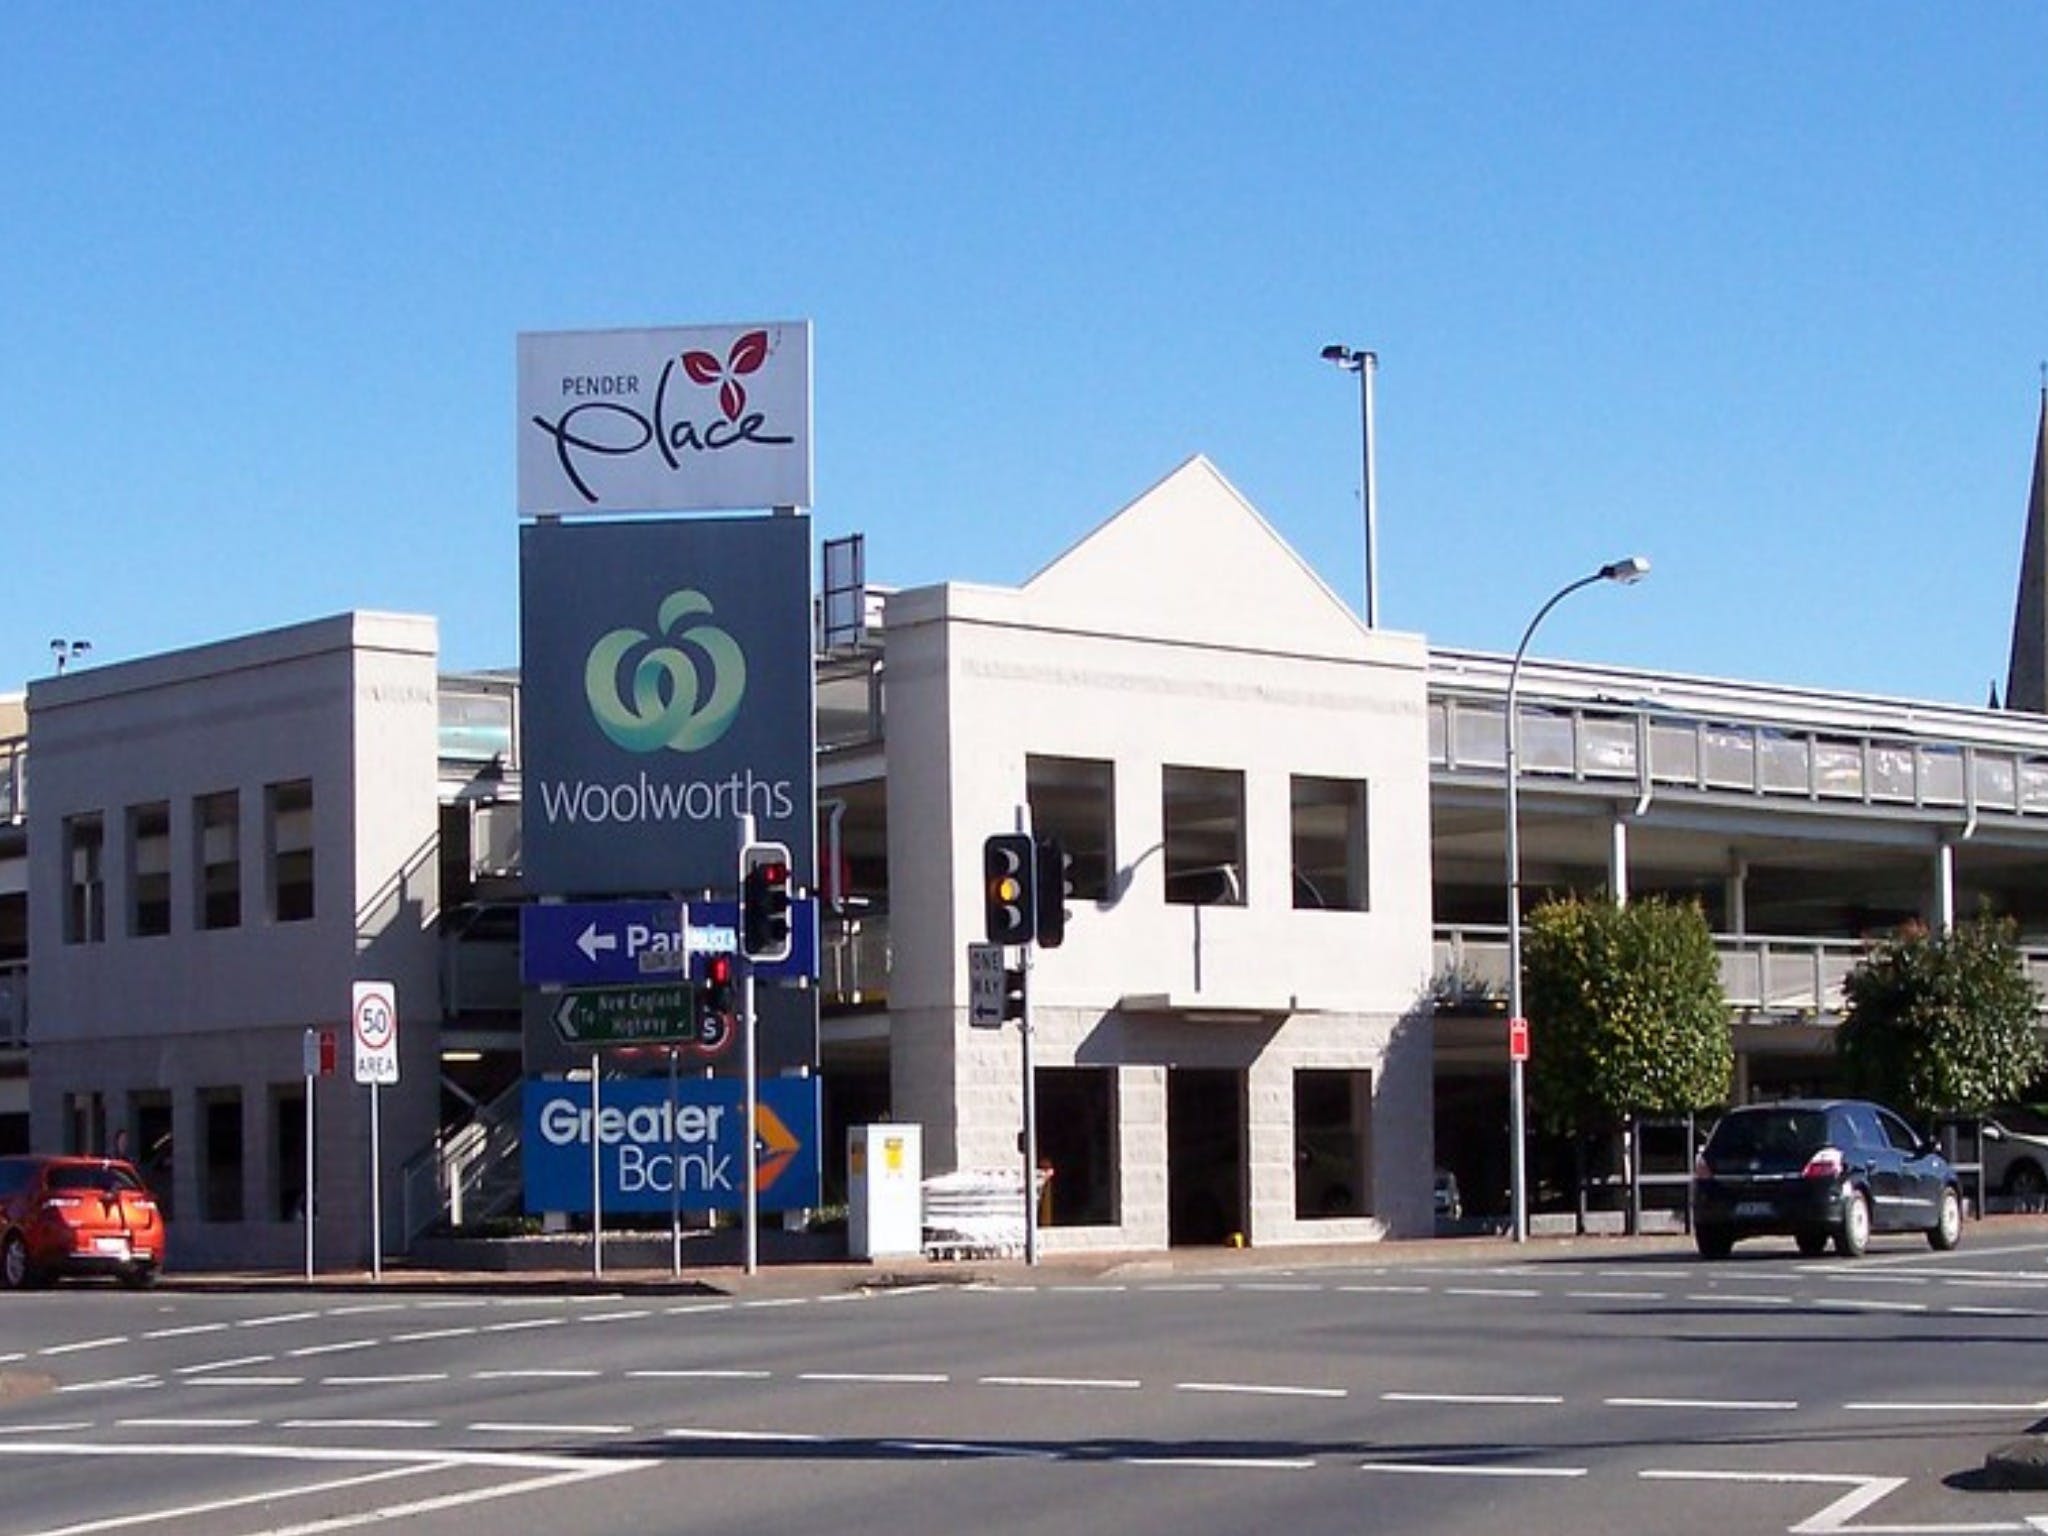 Pender Place Shopping Centre - Tourism Adelaide